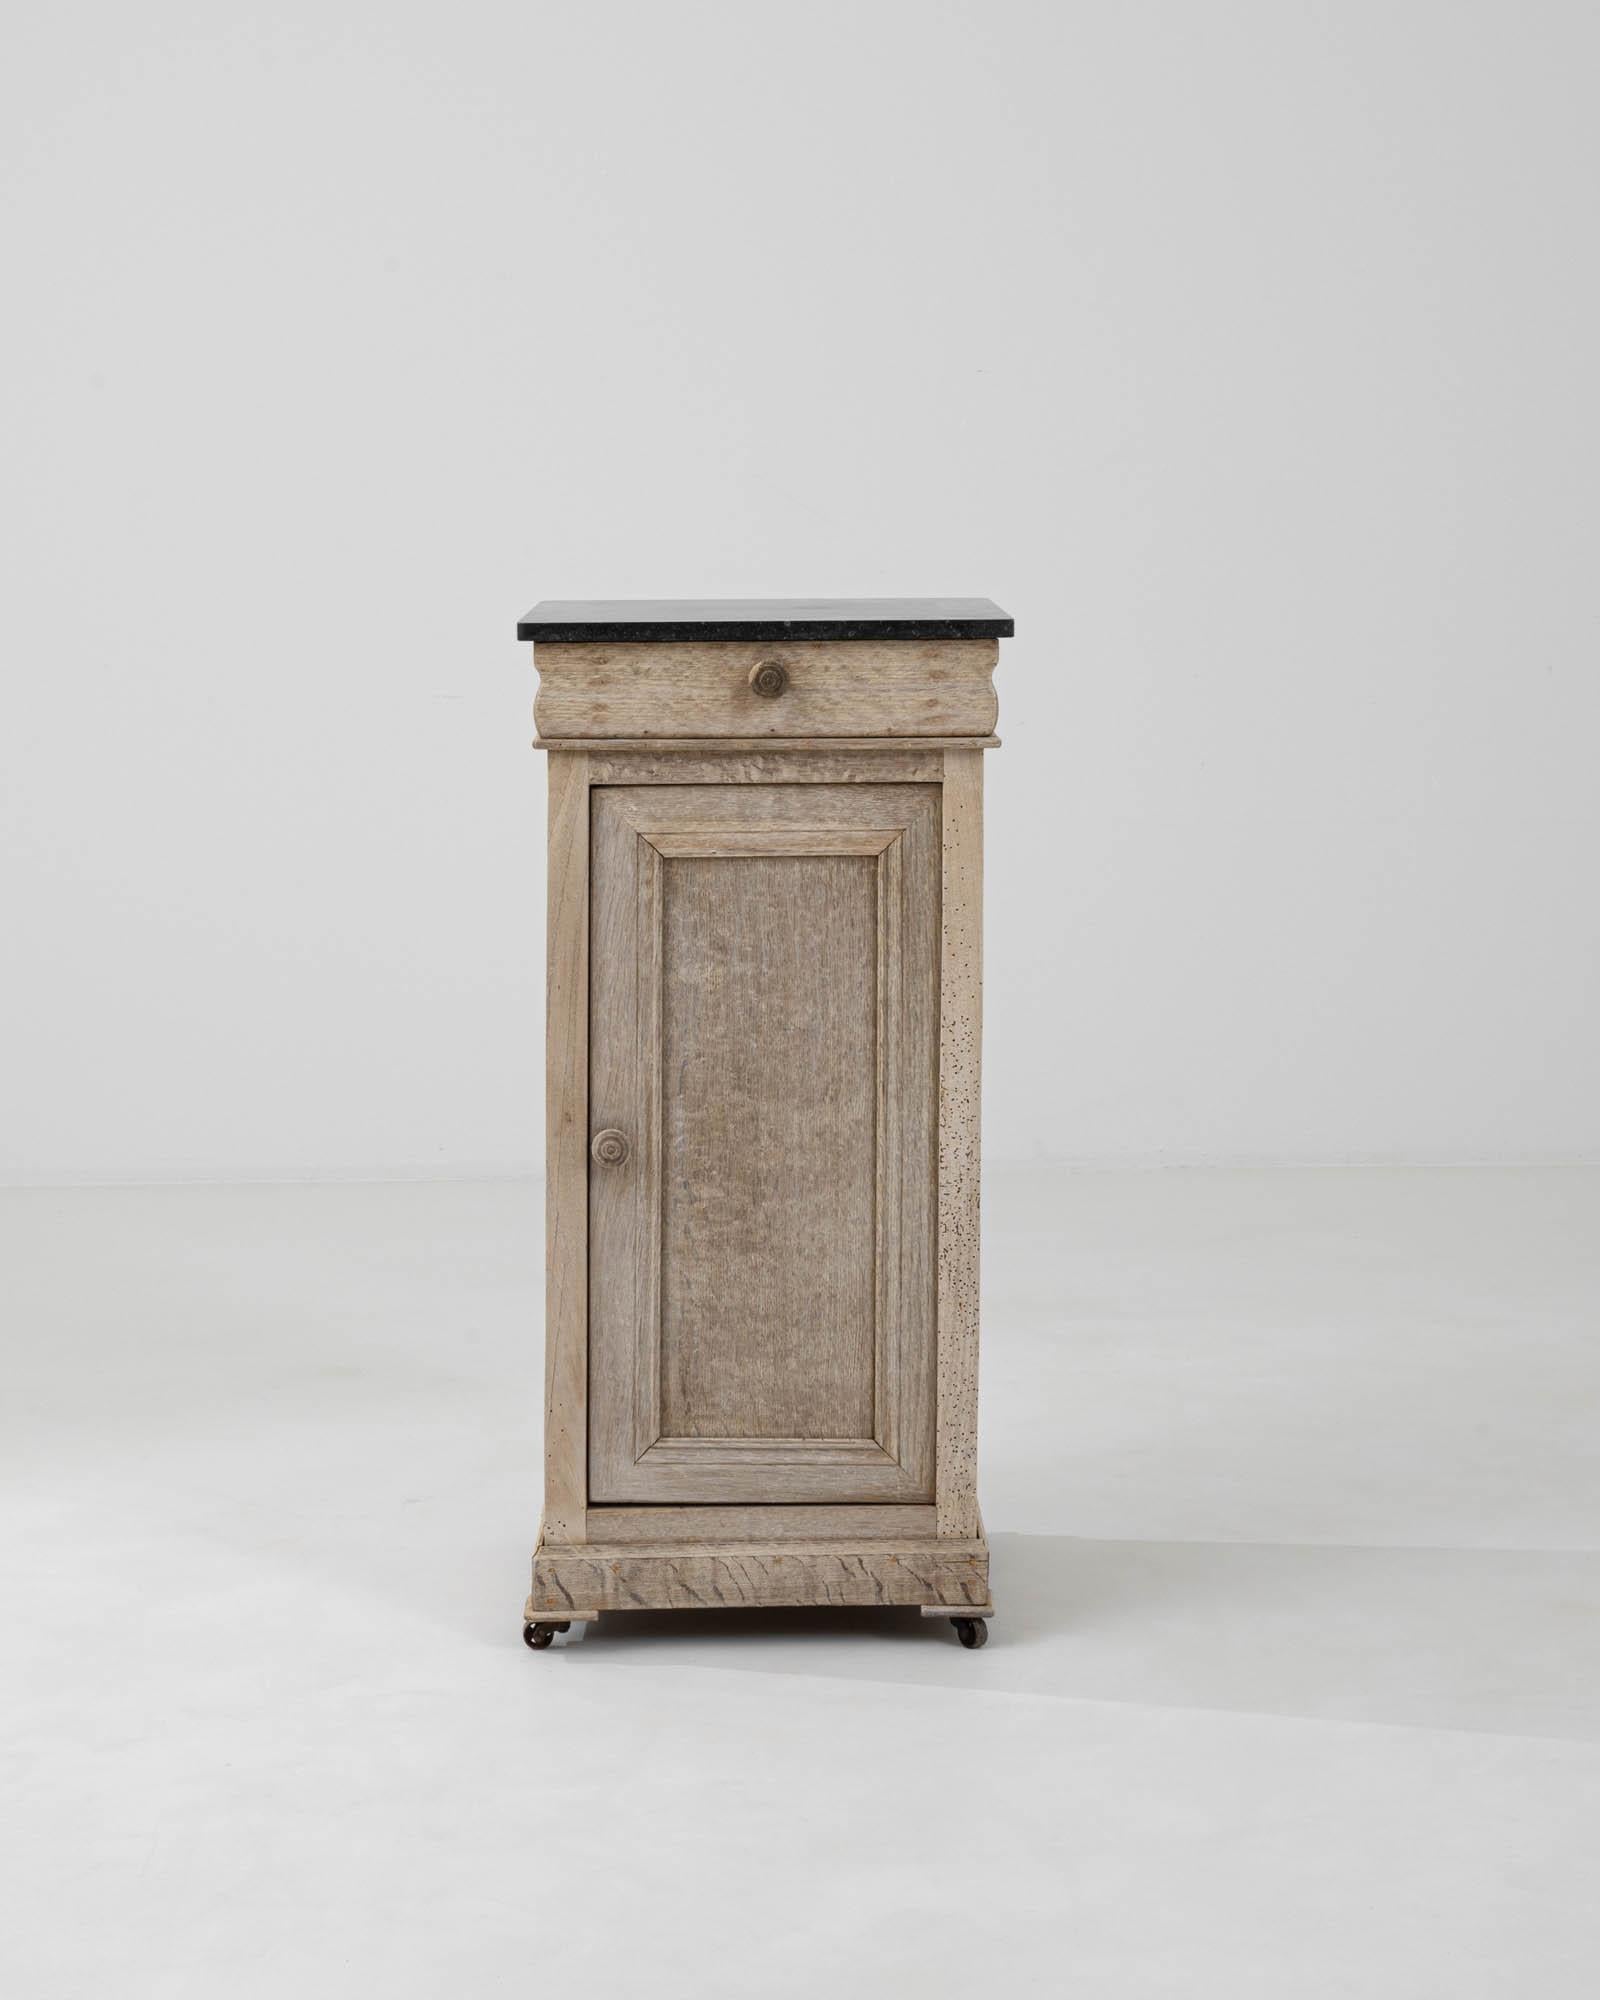 Introducing a piece of timeless elegance: our 1900s French Bleached Oak Bedside Table. Crafted with meticulous attention to detail, this elongated bedside table exudes understated sophistication. Fashioned from light oak, its light finish adds a